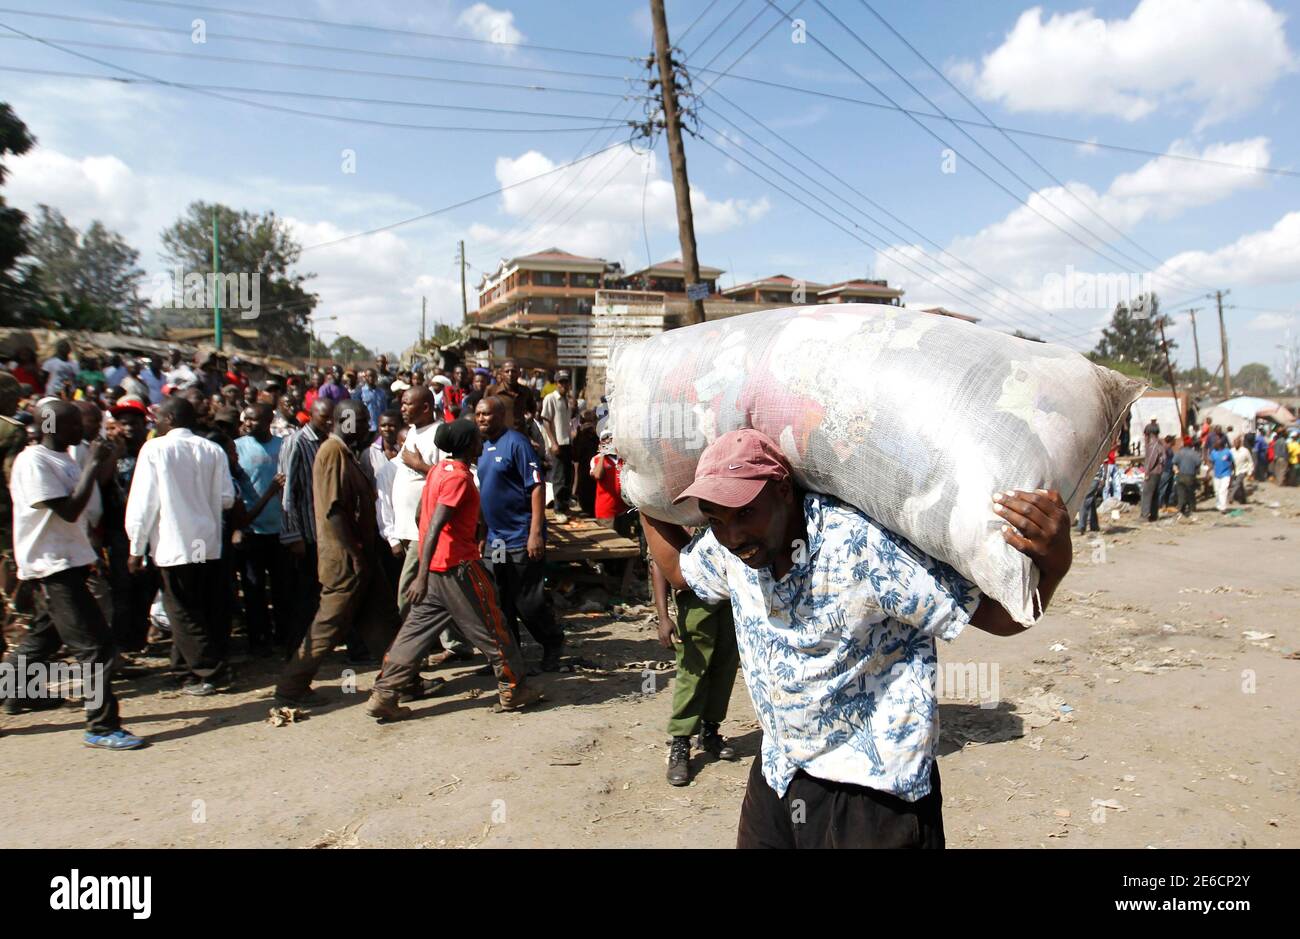 A trader carries a bag of second-hand clothes as he flees the scene of a twin explosion at the Gikomba open-air market in Kenya's capital Nairobi May 16, 2014. The death toll in twin blasts on Friday in the Kenyan capital Nairobi rose to at least 10 with close to 70 people wounded, the National Disaster Operations Centre said. REUTERS/Thomas Mukoya (KENYA - Tags: CRIME LAW CIVIL UNREST) Stock Photo